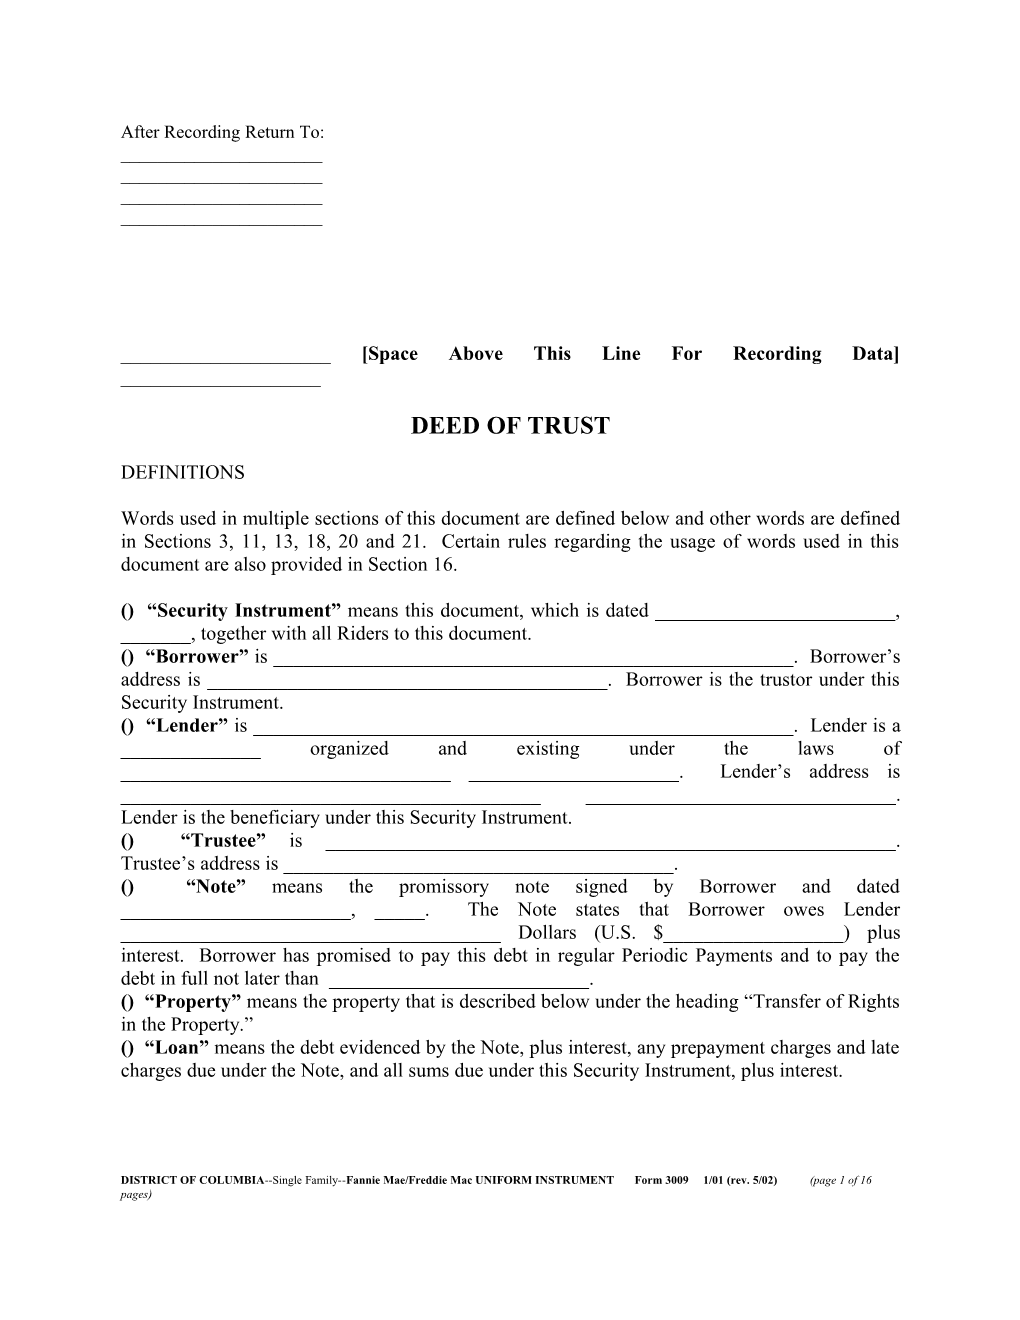 District of Columbia Security Instrument (Form 3009): Word